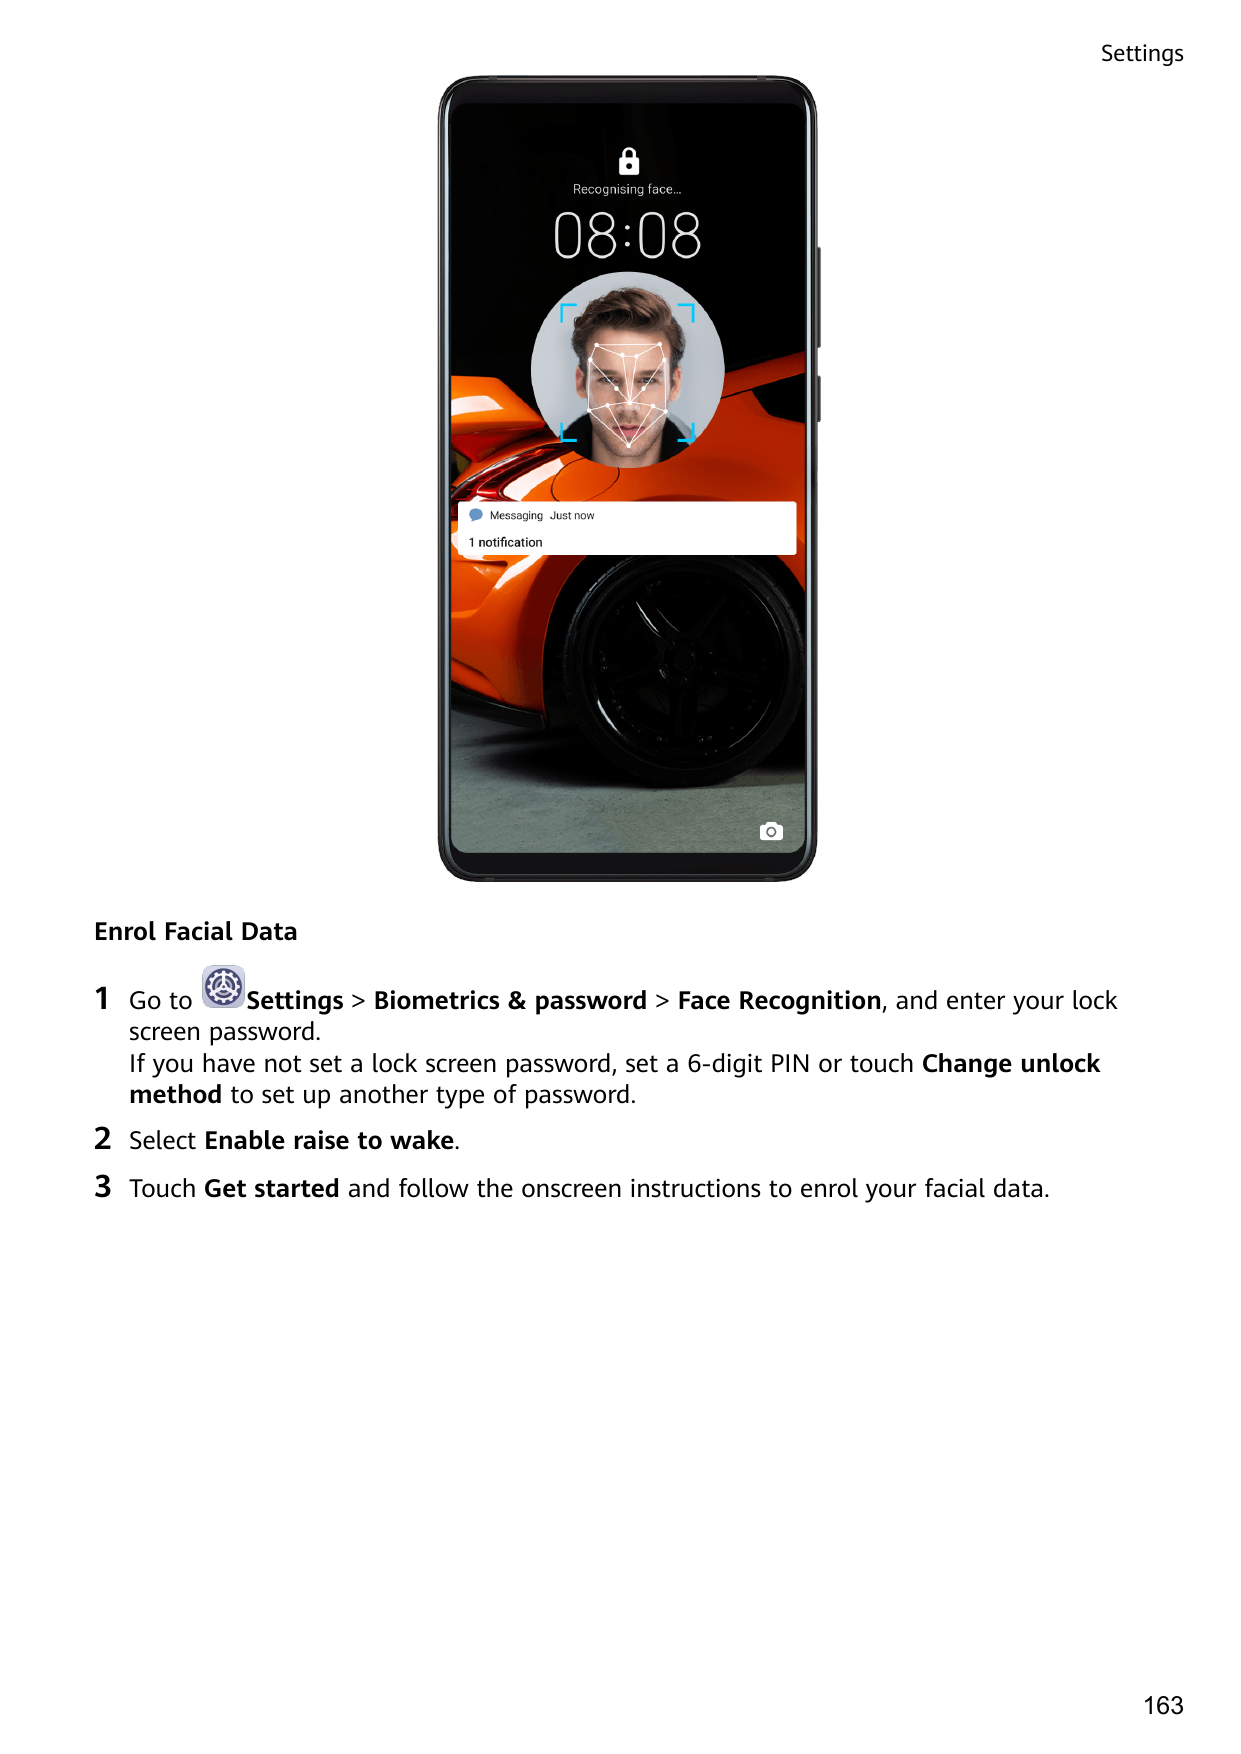 SettingsEnrol Facial Data1Settings > Biometrics & password > Face Recognition, and enter your lockGo toscreen password.If you ha